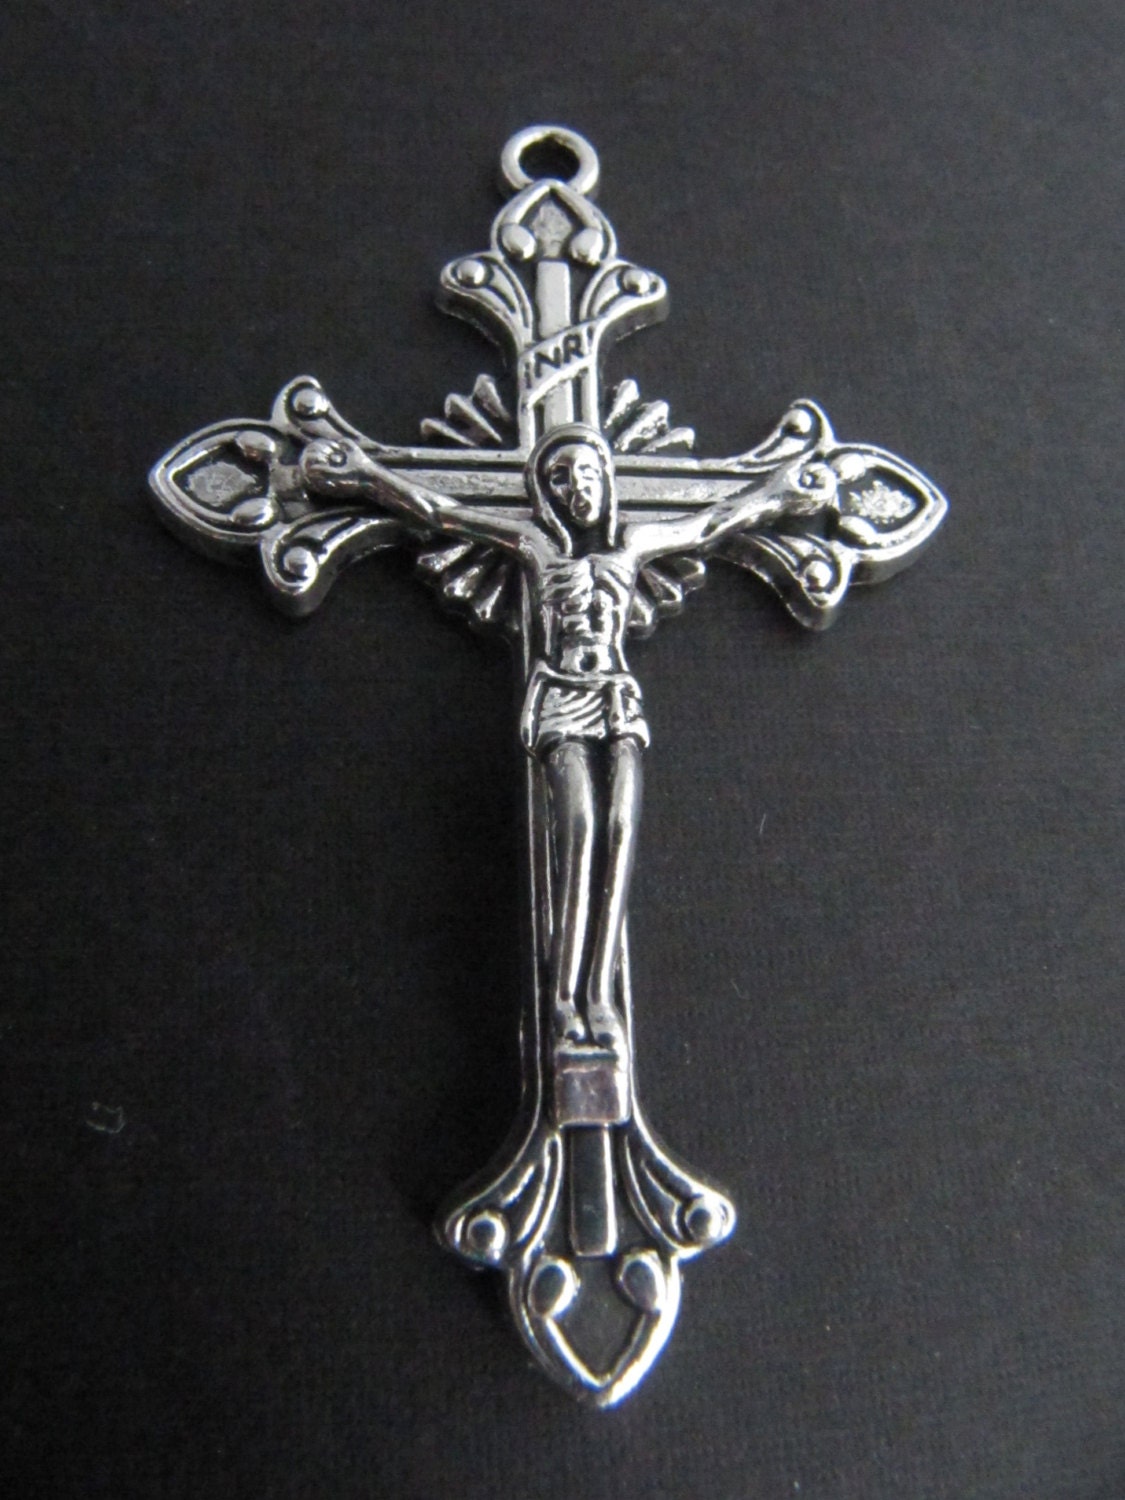 Lovely Large Ornate Silver Rosary Crucifix by InspirationalSupply